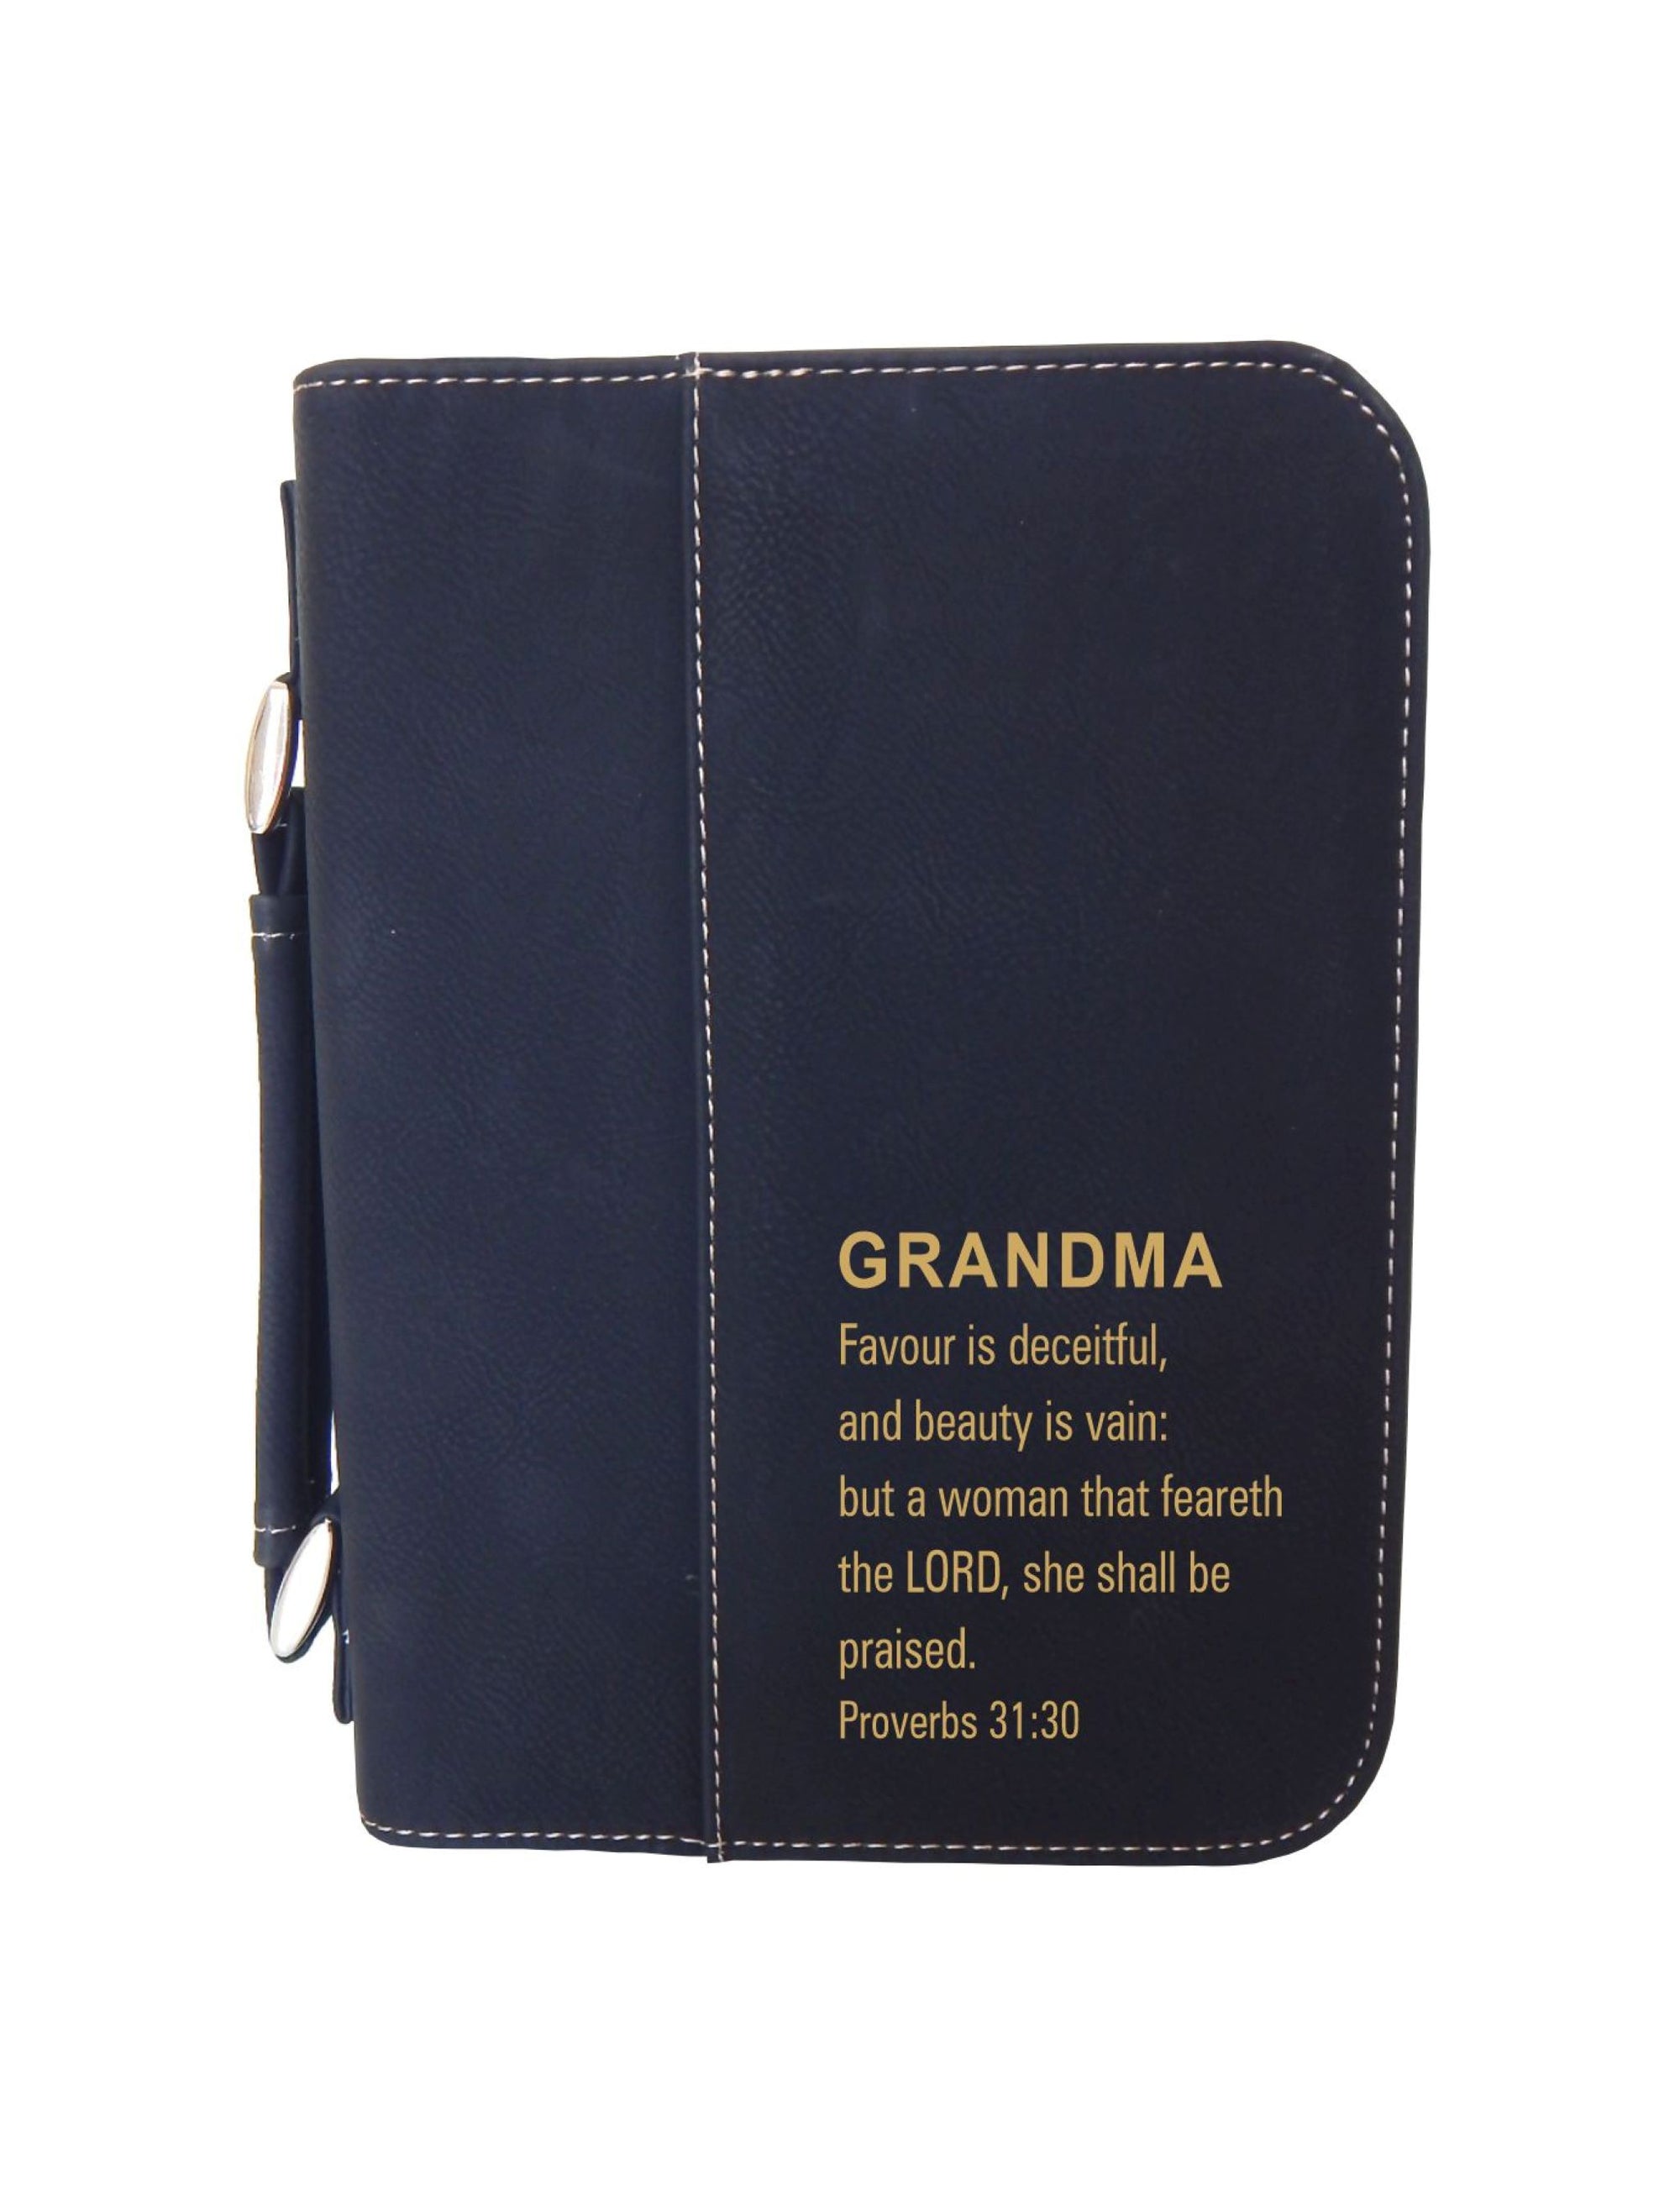 Godly Gift for Grandma | Religious Gift for Her | Mother's Day Bible Cover BCL038